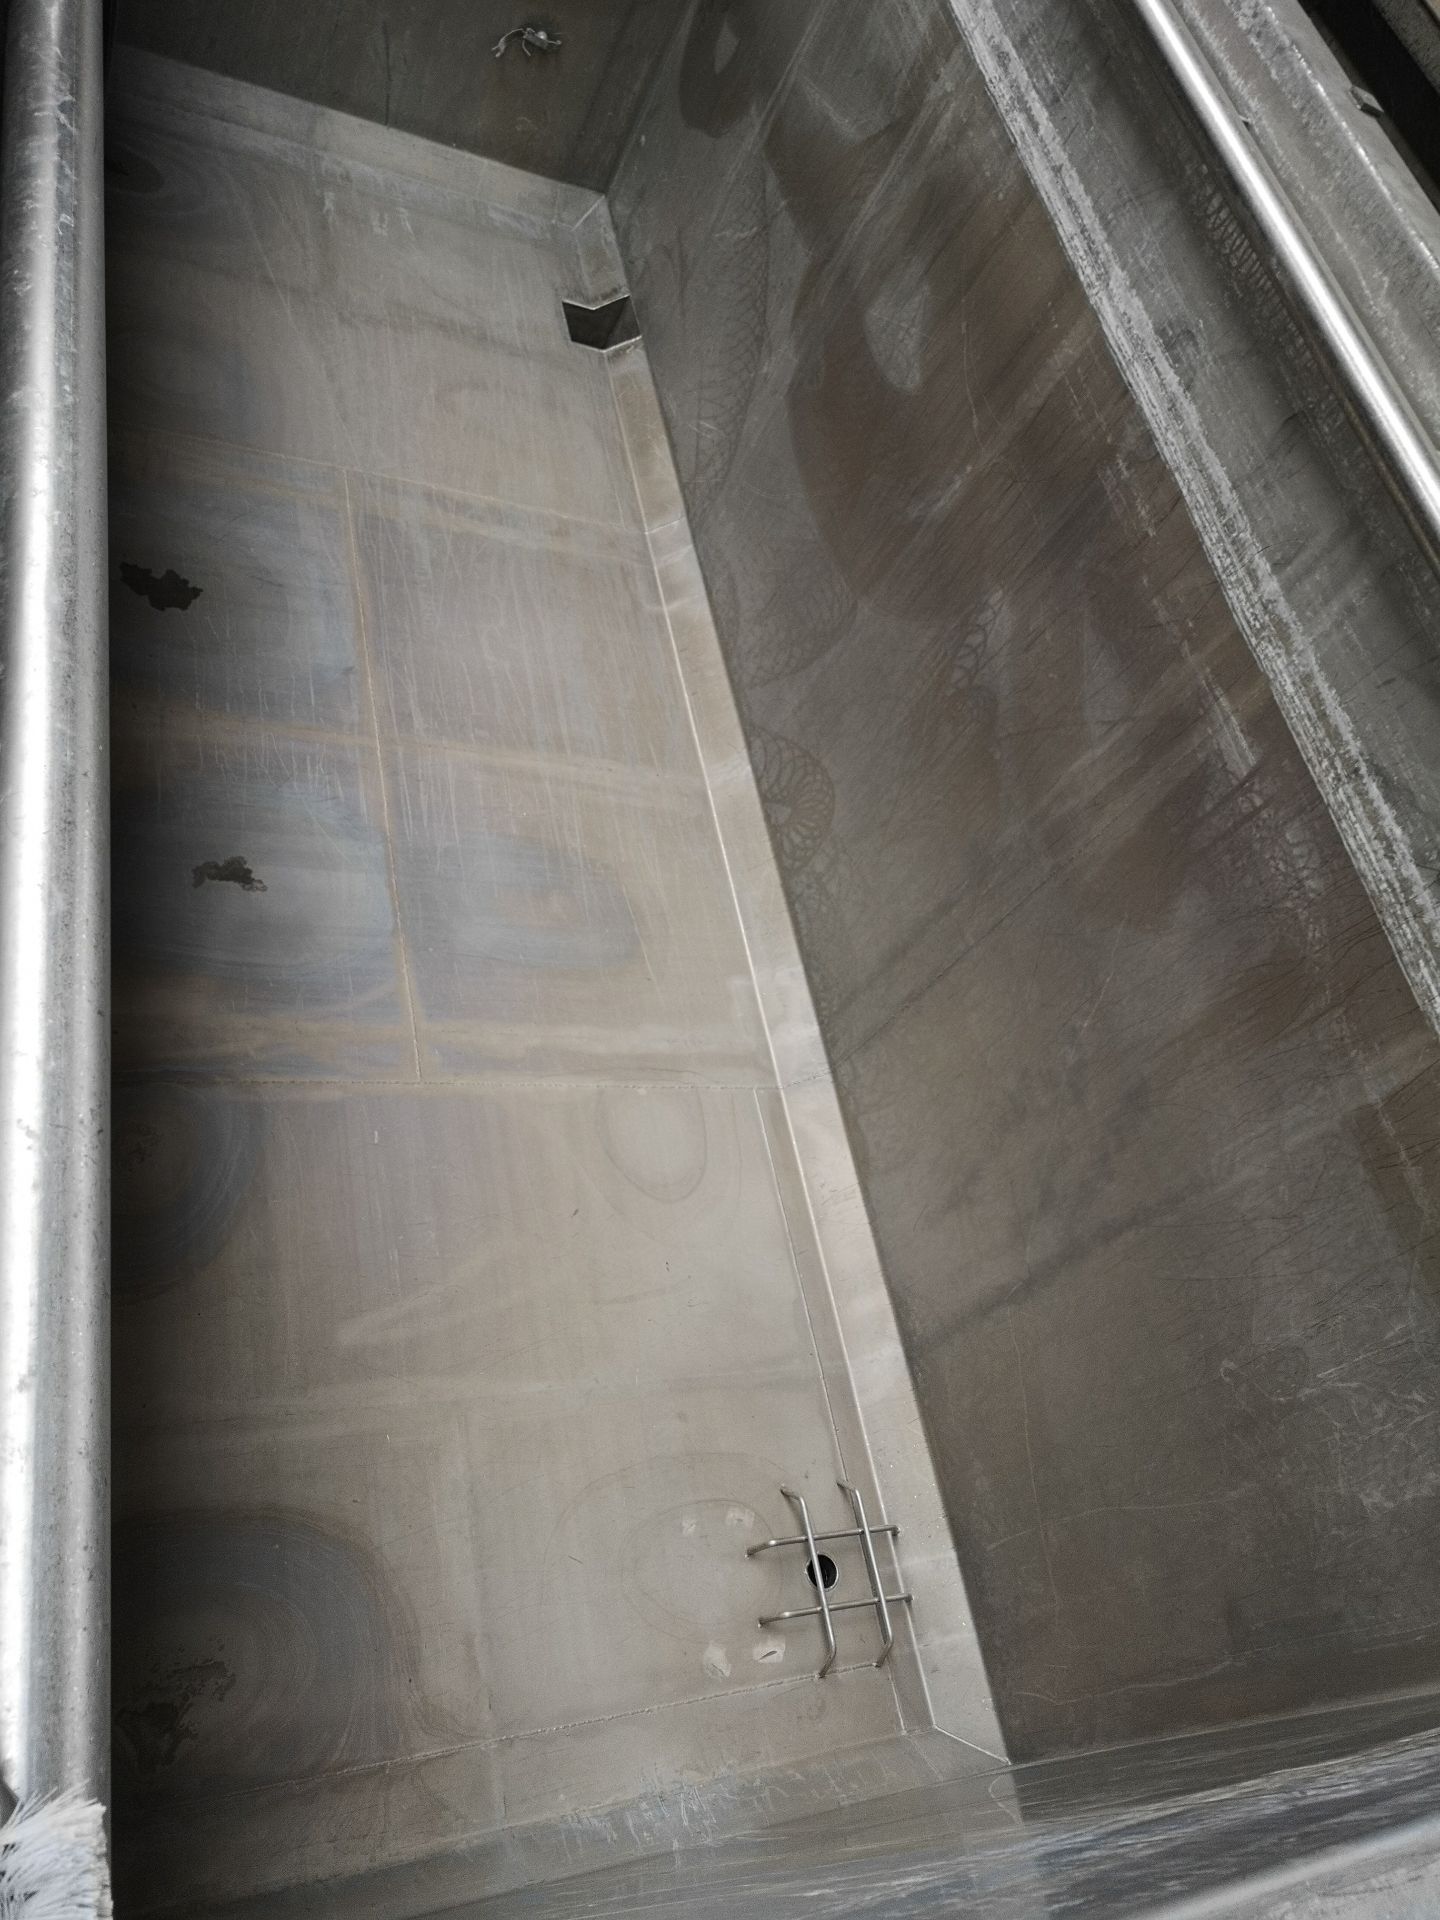 4 Galvanised Treatment Tanks with Platform and Stairs including 2 Outlets for Waste *PLUS VAT* - Image 5 of 5